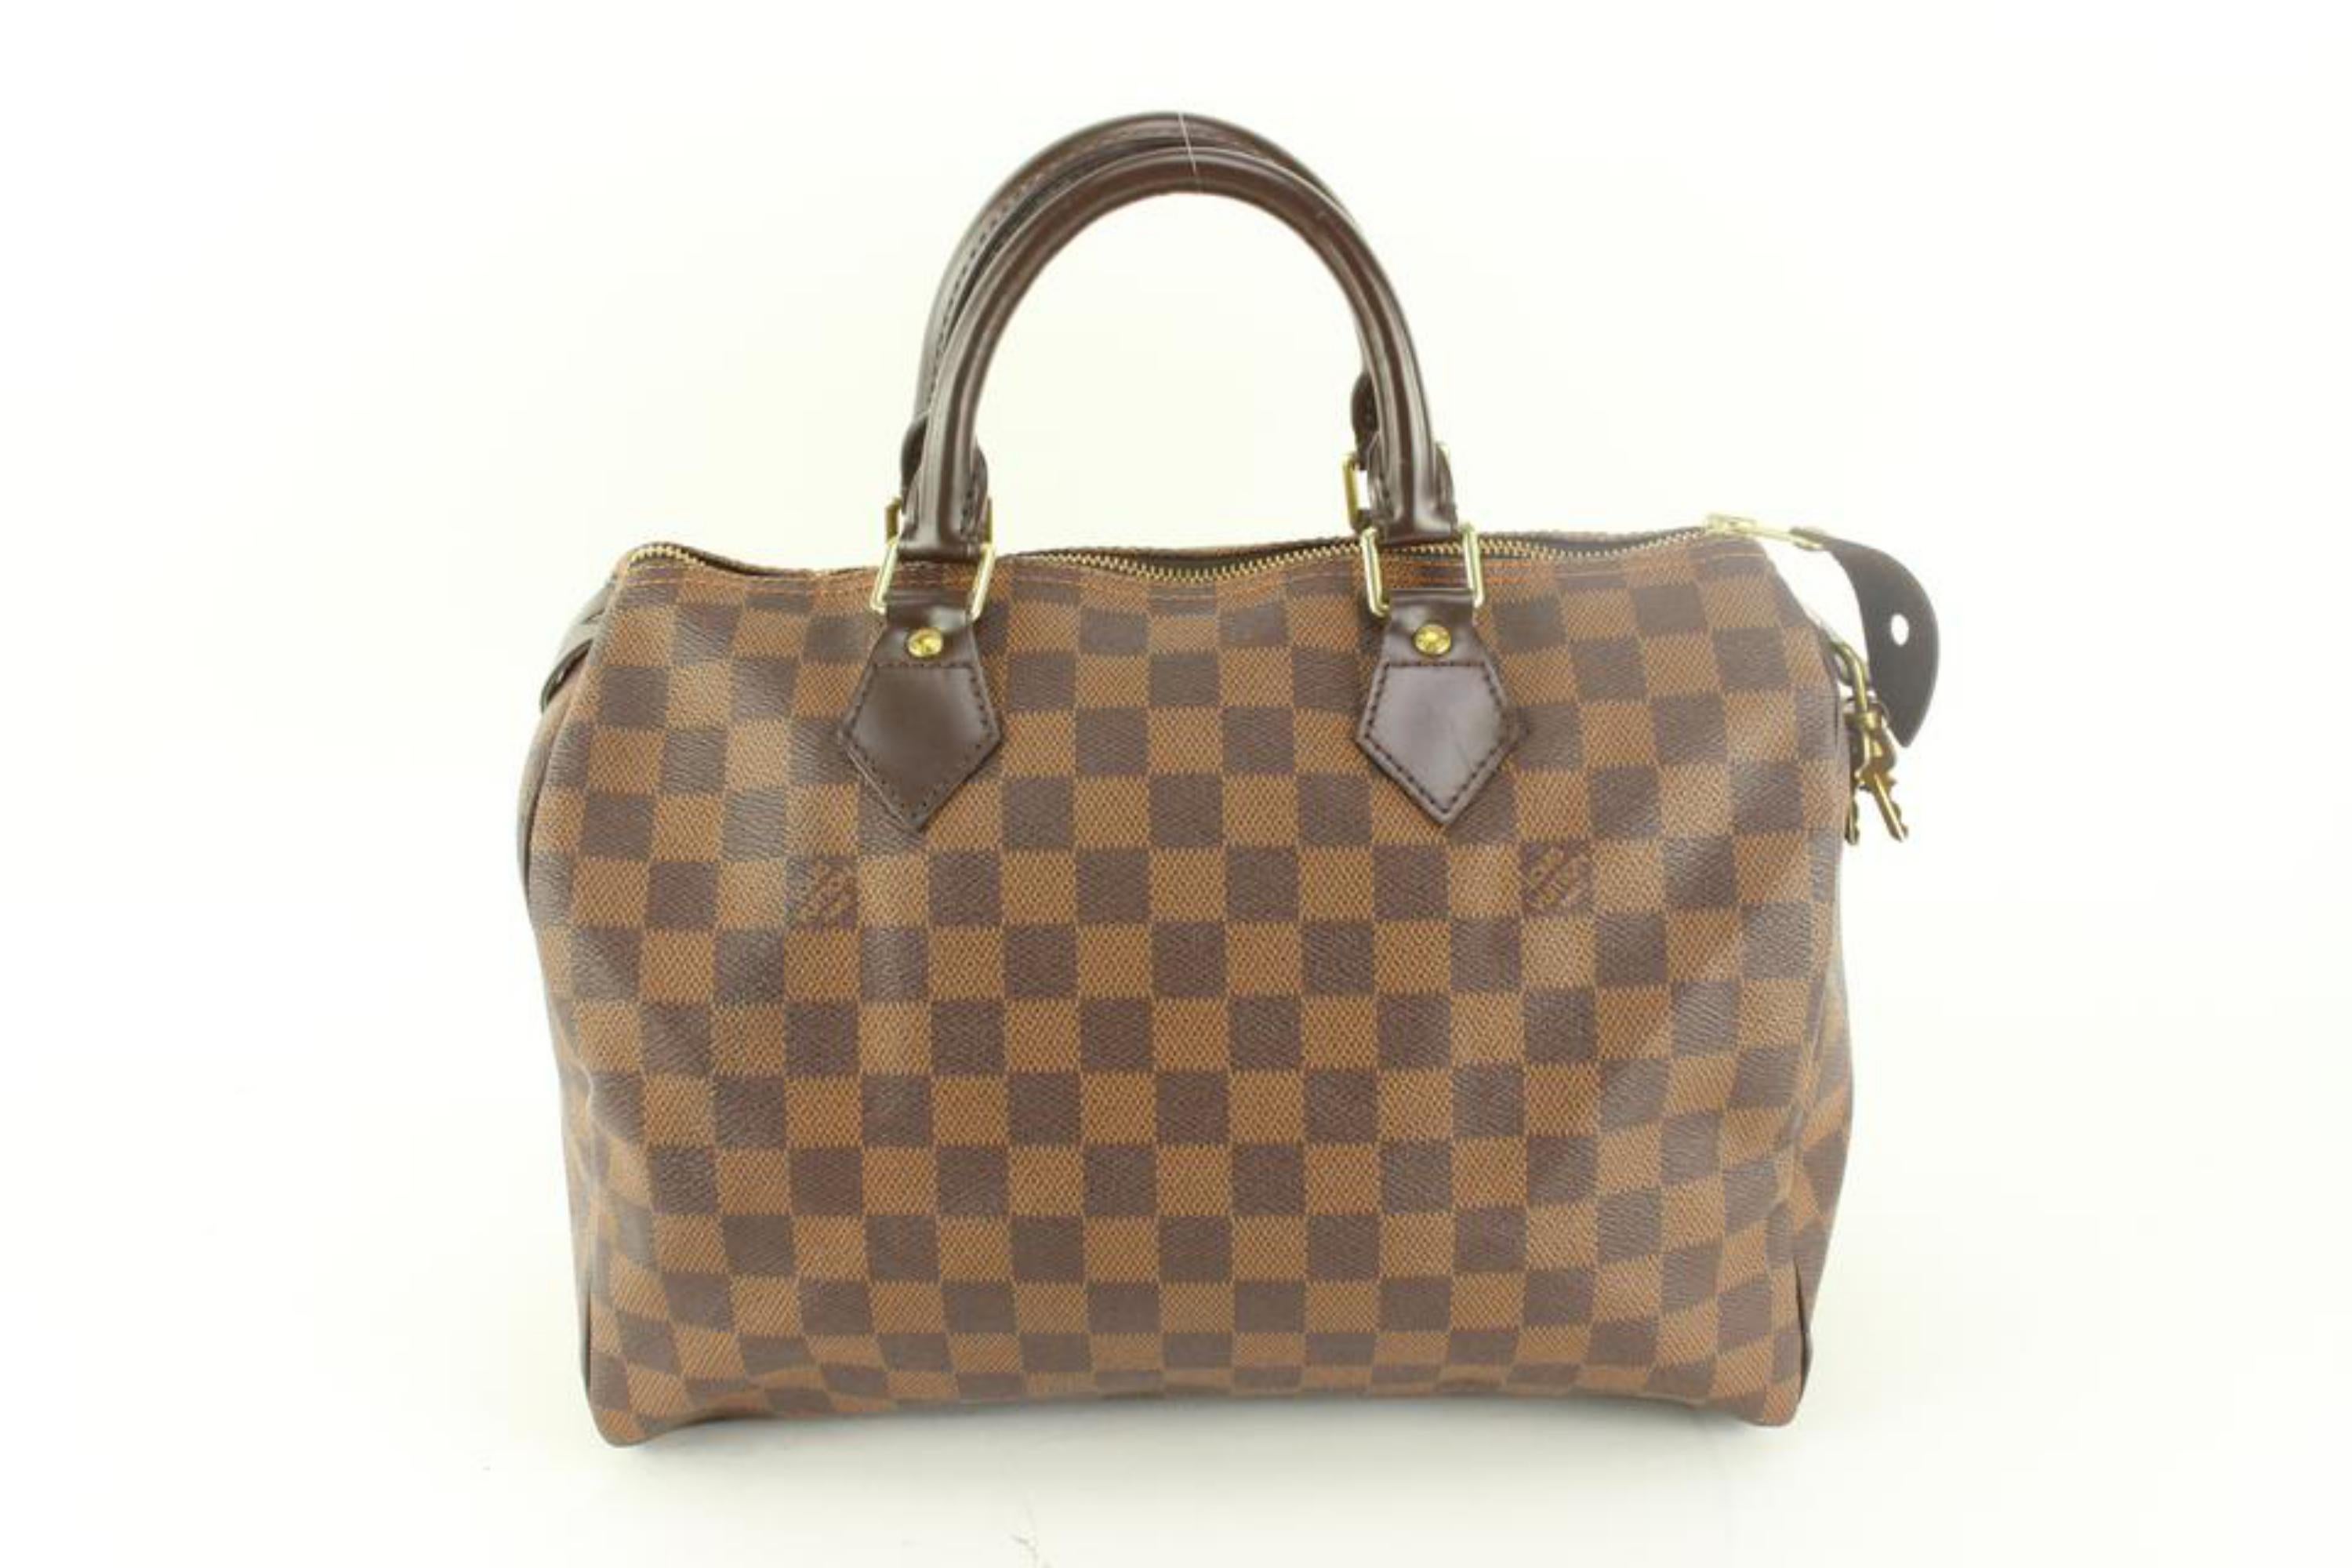 Louis Vuitton Damier Ebene Speedy 30 Boston Bag 51lz62s In Good Condition For Sale In Dix hills, NY